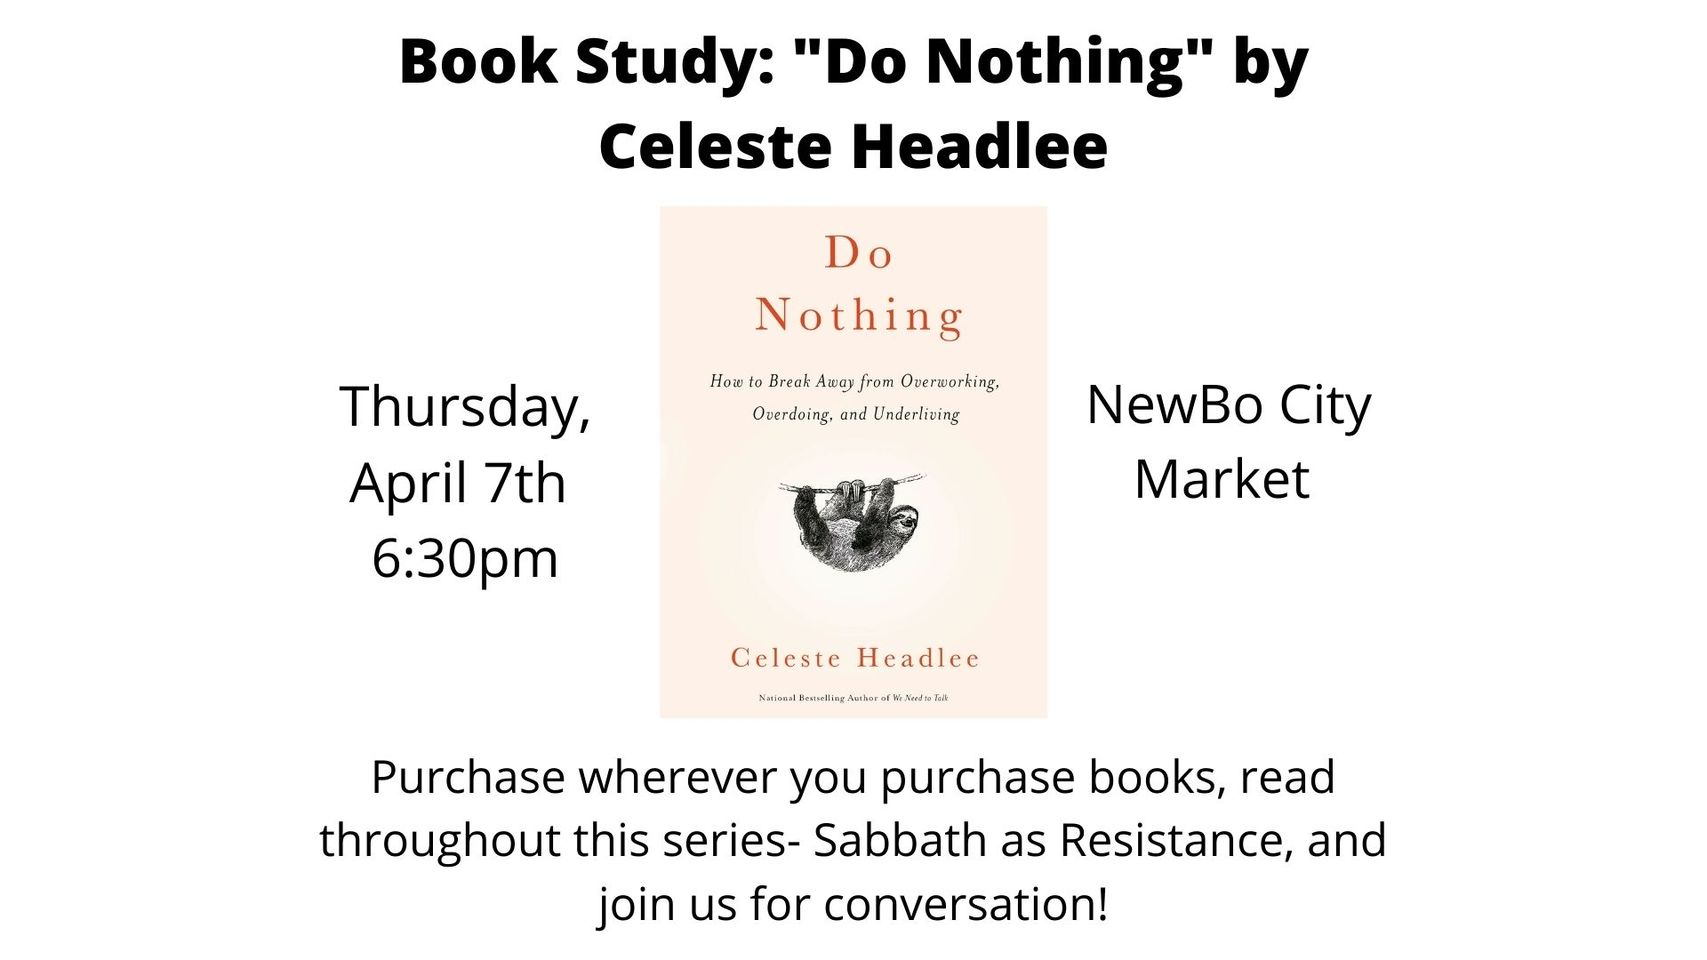 NOURISHED: Book Study: “Do Nothing” by Celeste Headlee